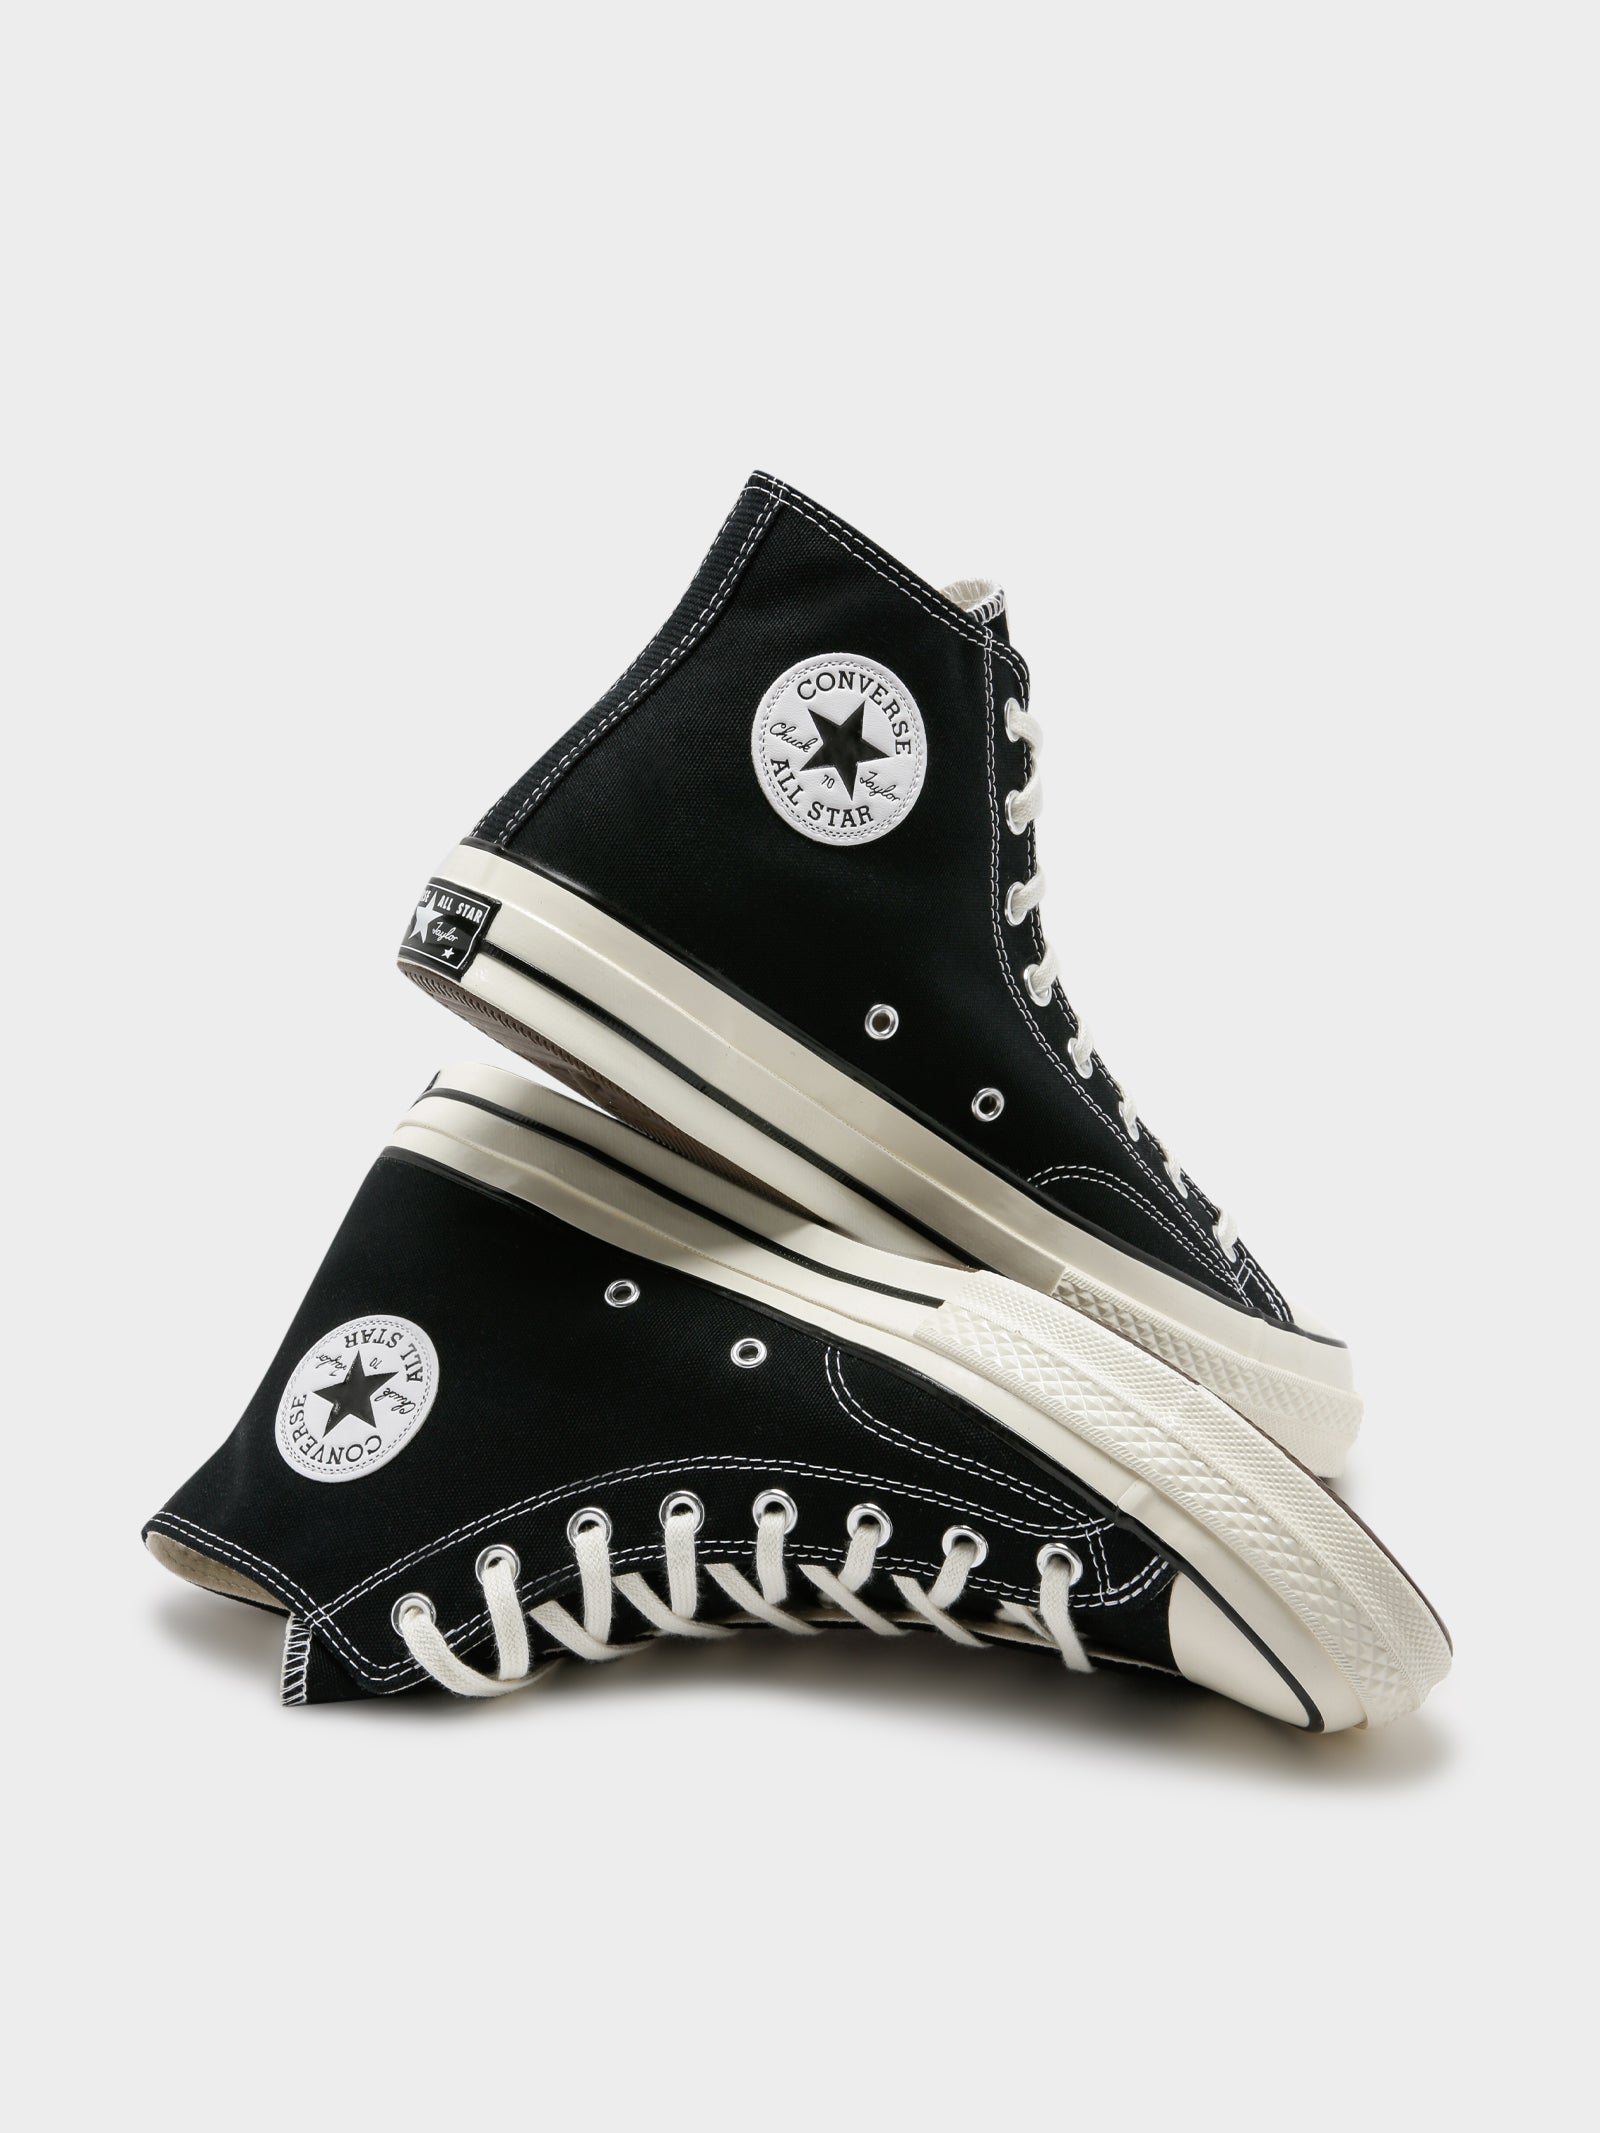 Unisex Chuck Taylor All Star 70 High Top Sneakers in Black - Glue